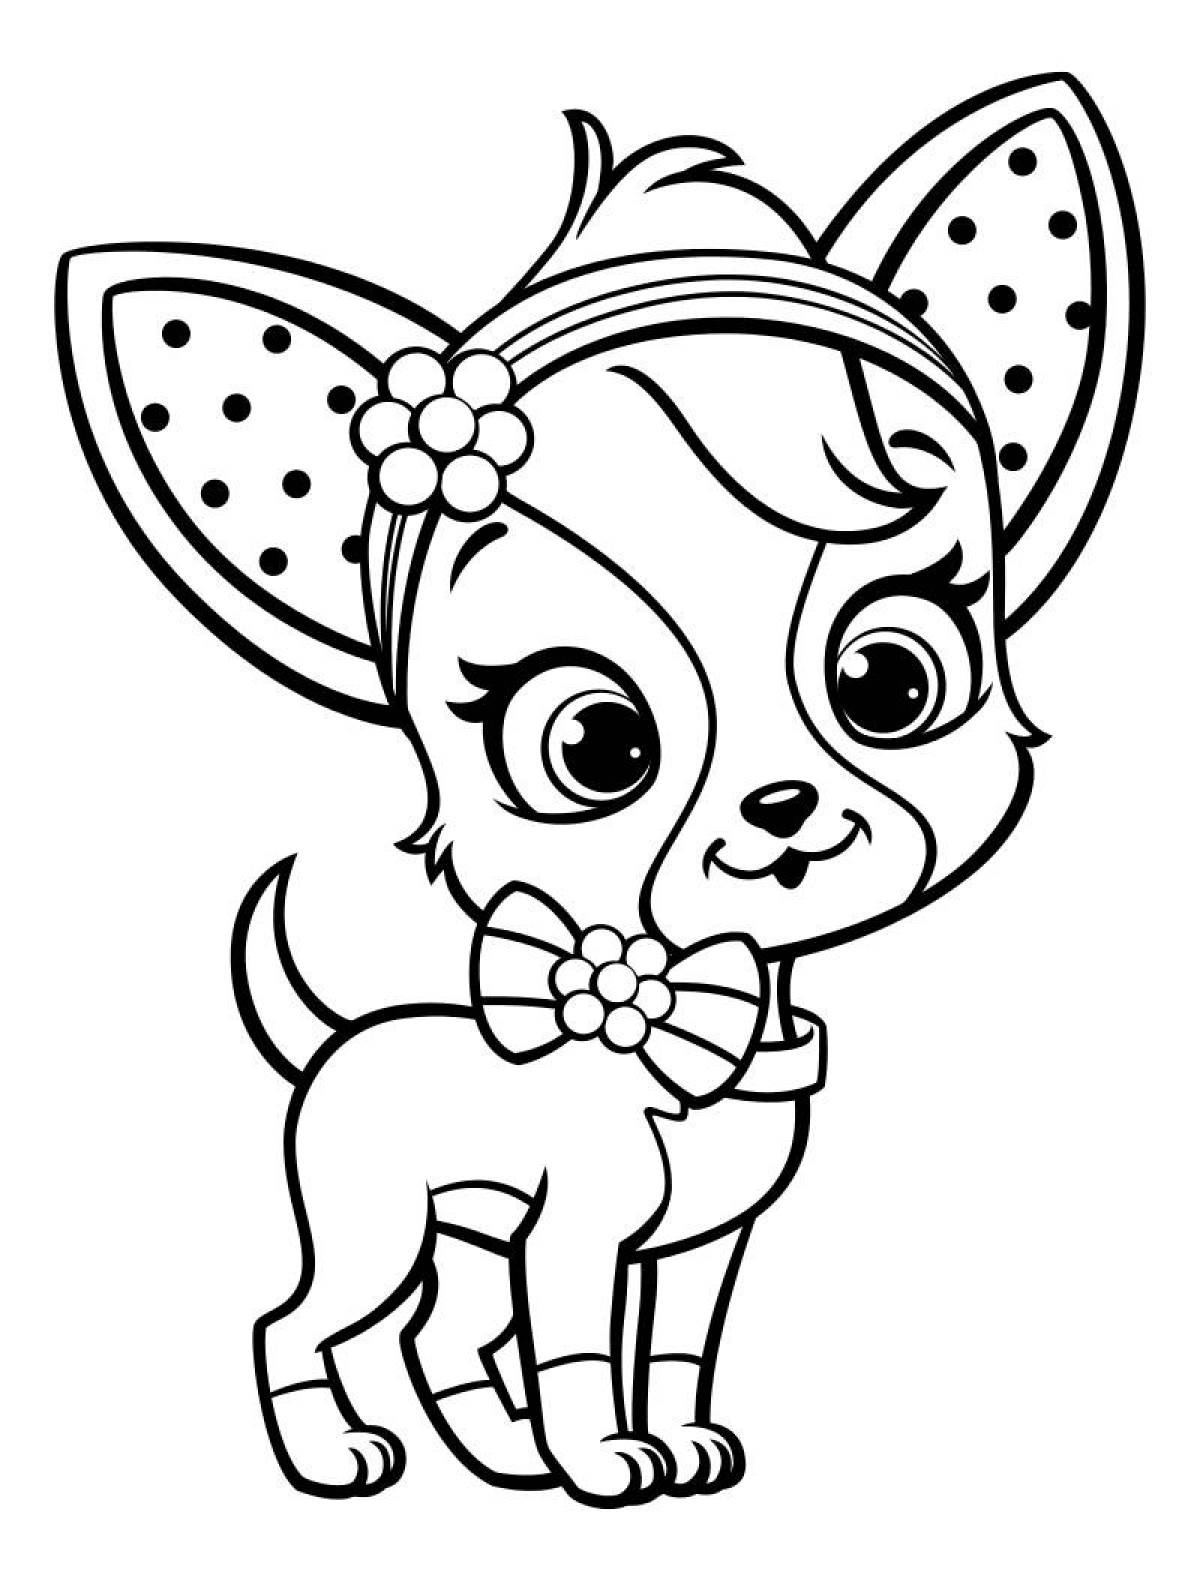 Live dog coloring for children 6-7 years old